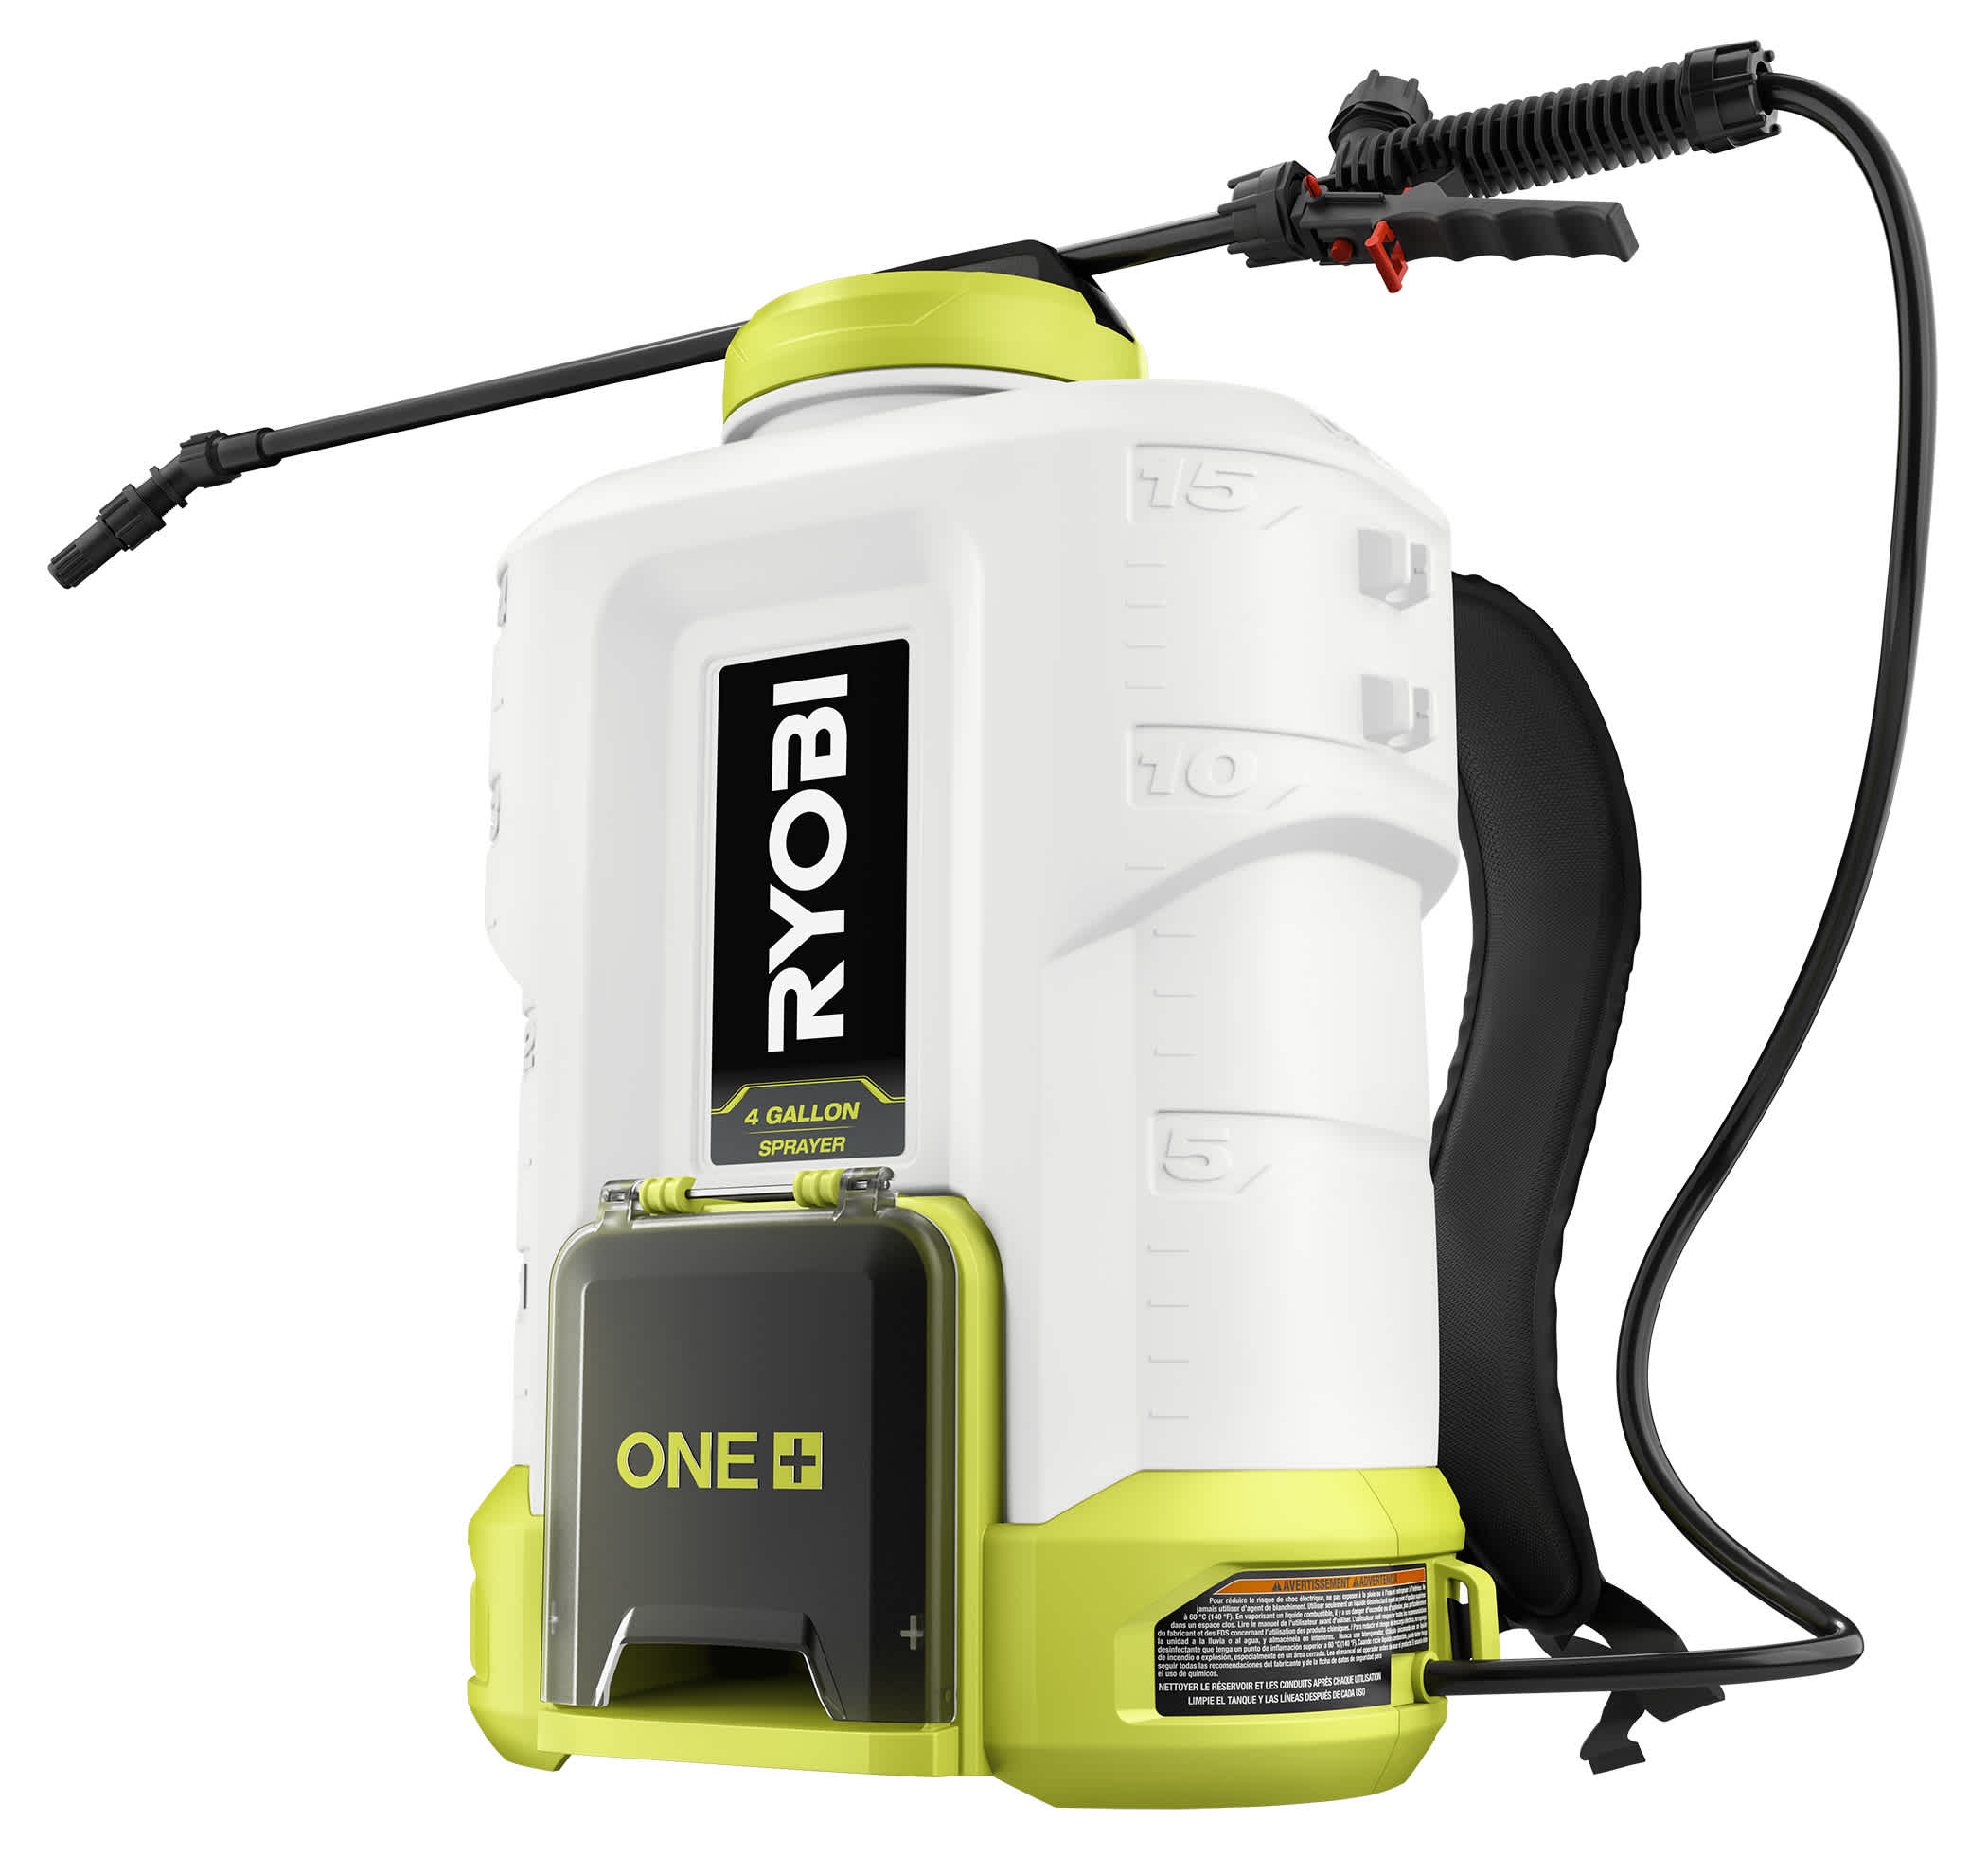 Feature Image for 18V ONE+ 4 GALLON BACKPACK CHEMICAL SPRAYER KIT.